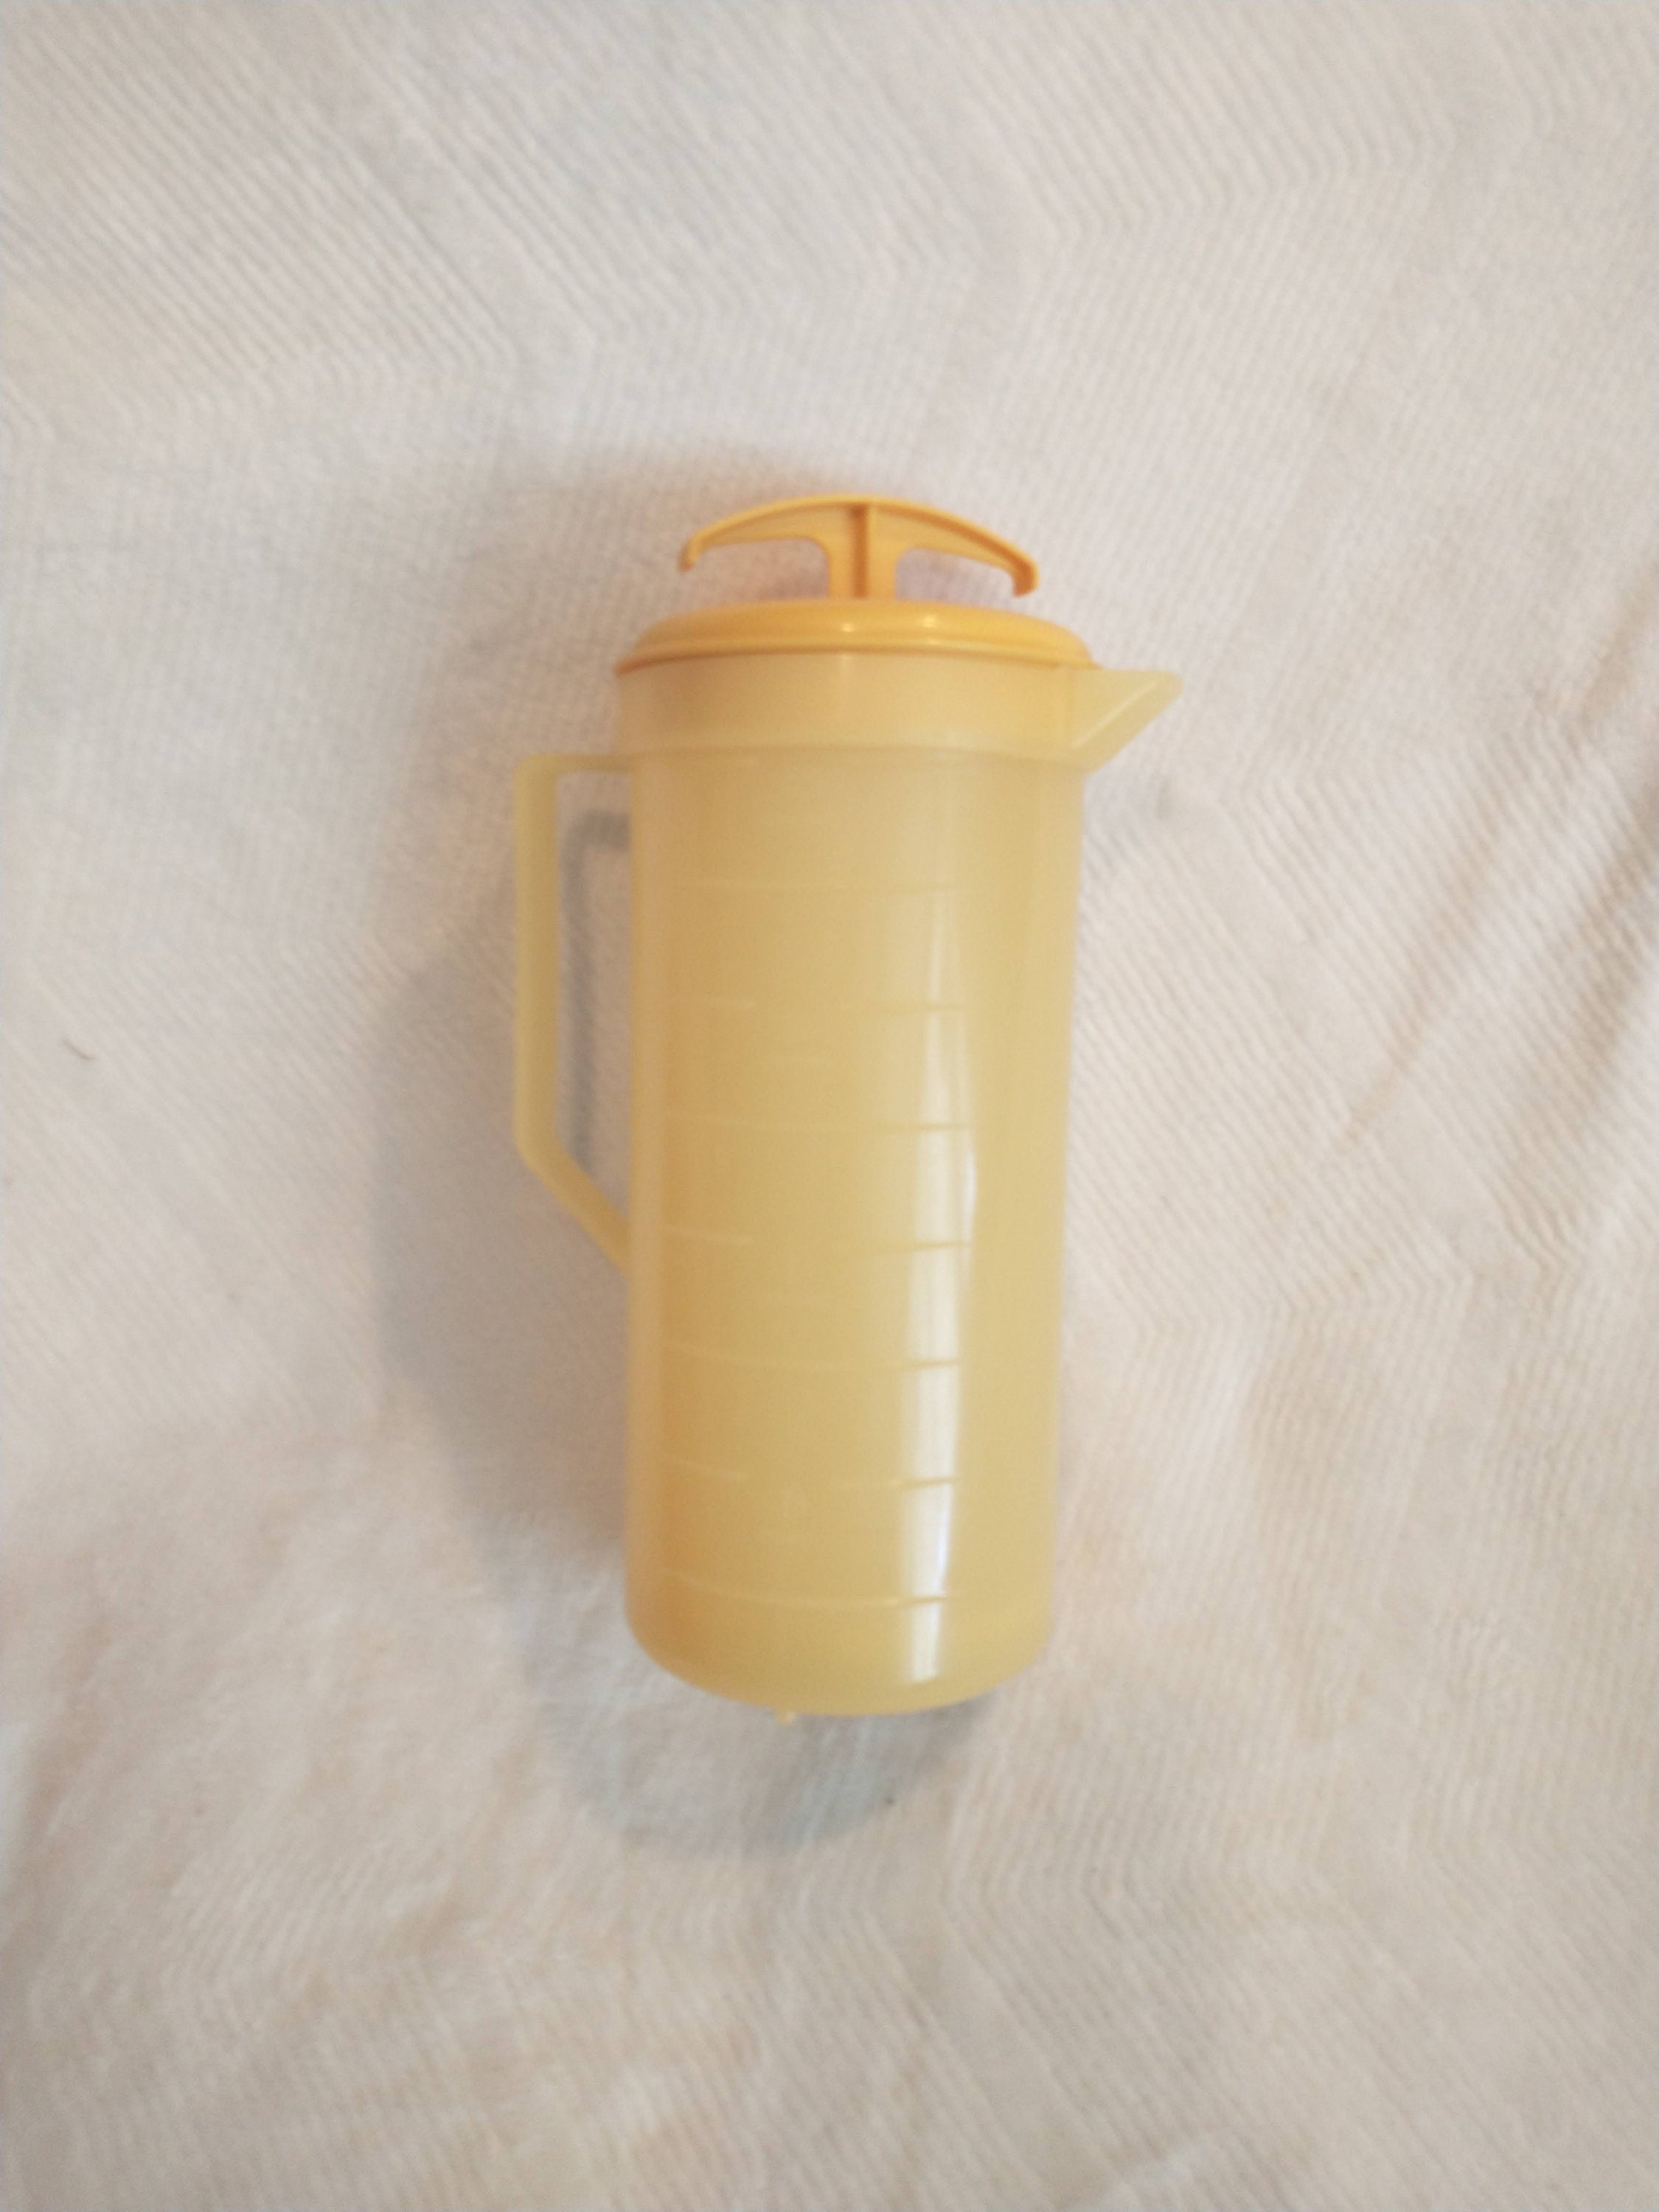 Yellow Mixer Pitcher W/ Lid Vintage Tupperware Pitcher W/ Attached Mixer  Vntg Yellow Drink Mixing Pitcher W/ Lid Kool Aid Pitcher 